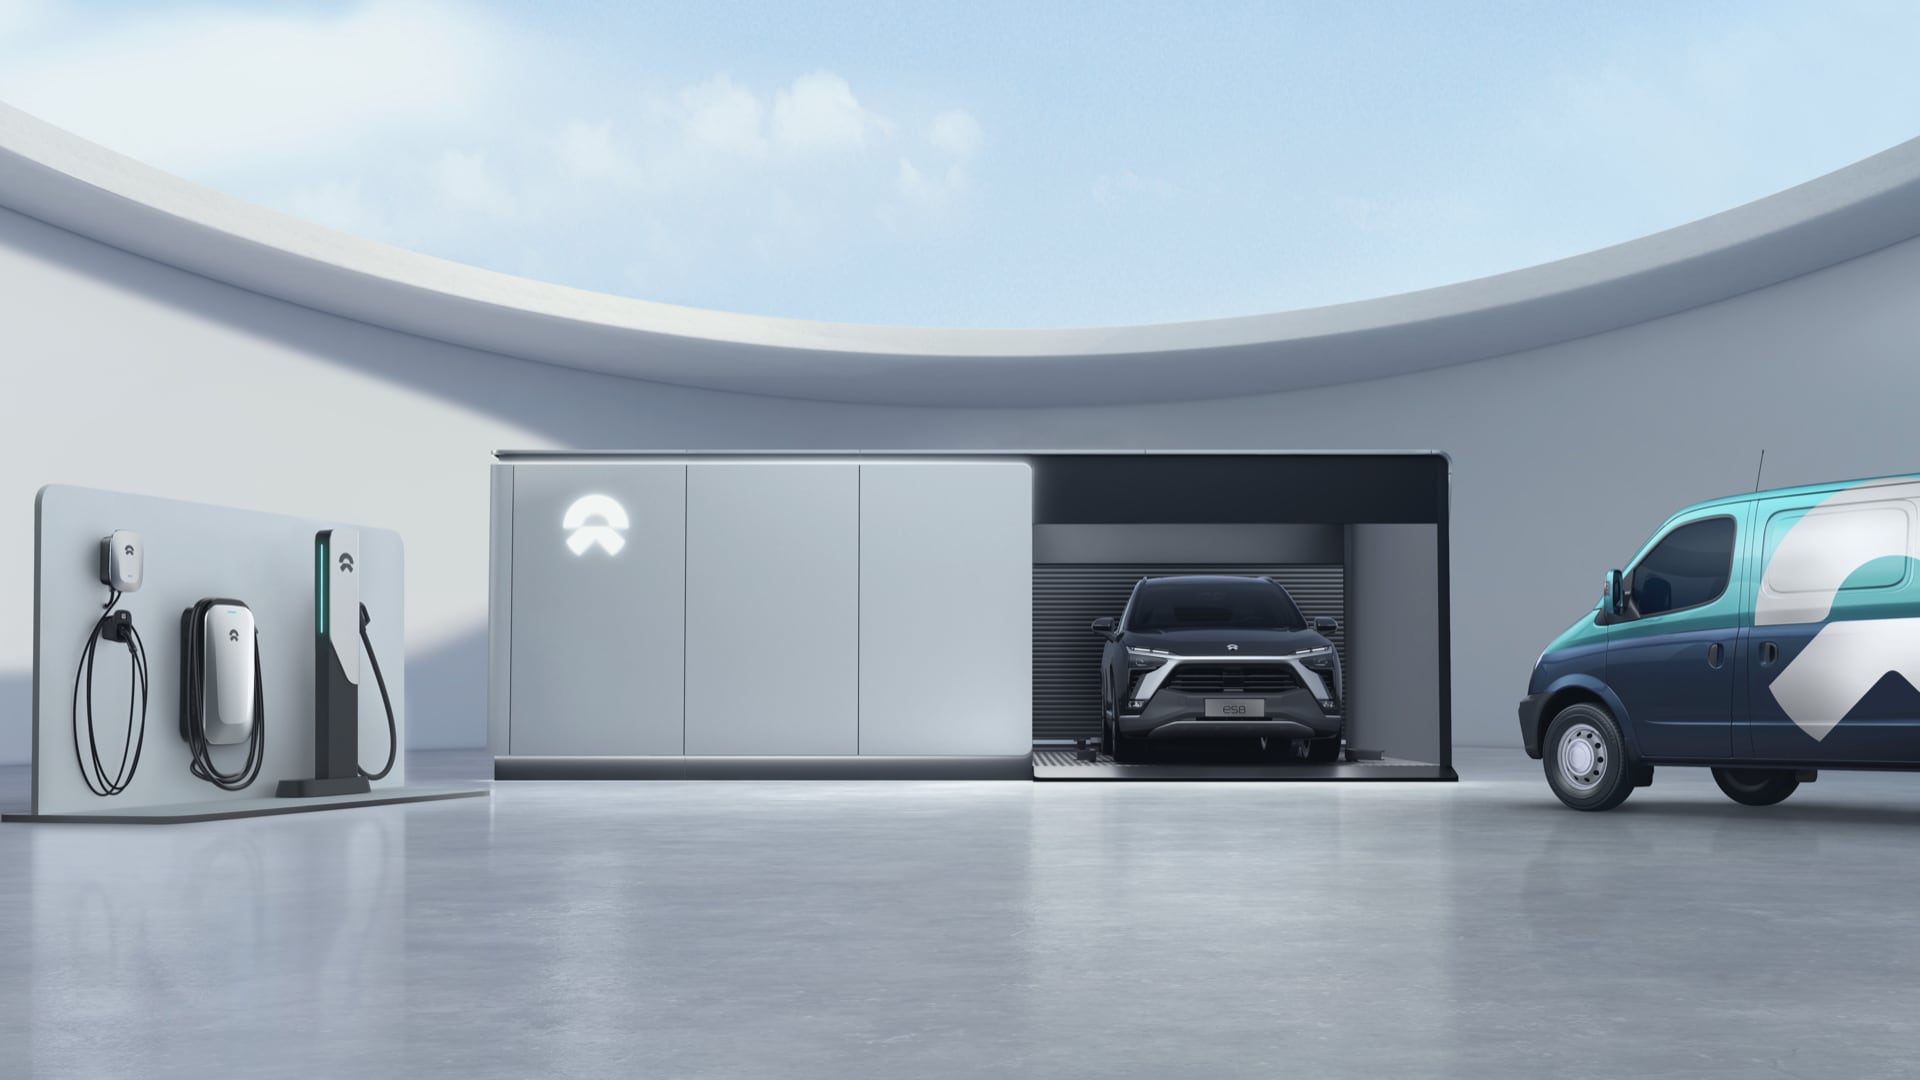 On July 9, 2021, NIO held its first NIO Power Day in Shanghai. NIO shared the history and core technologies of NIO Power and unveiled “NIO Power 2025”, the battery swap station deployment plan.